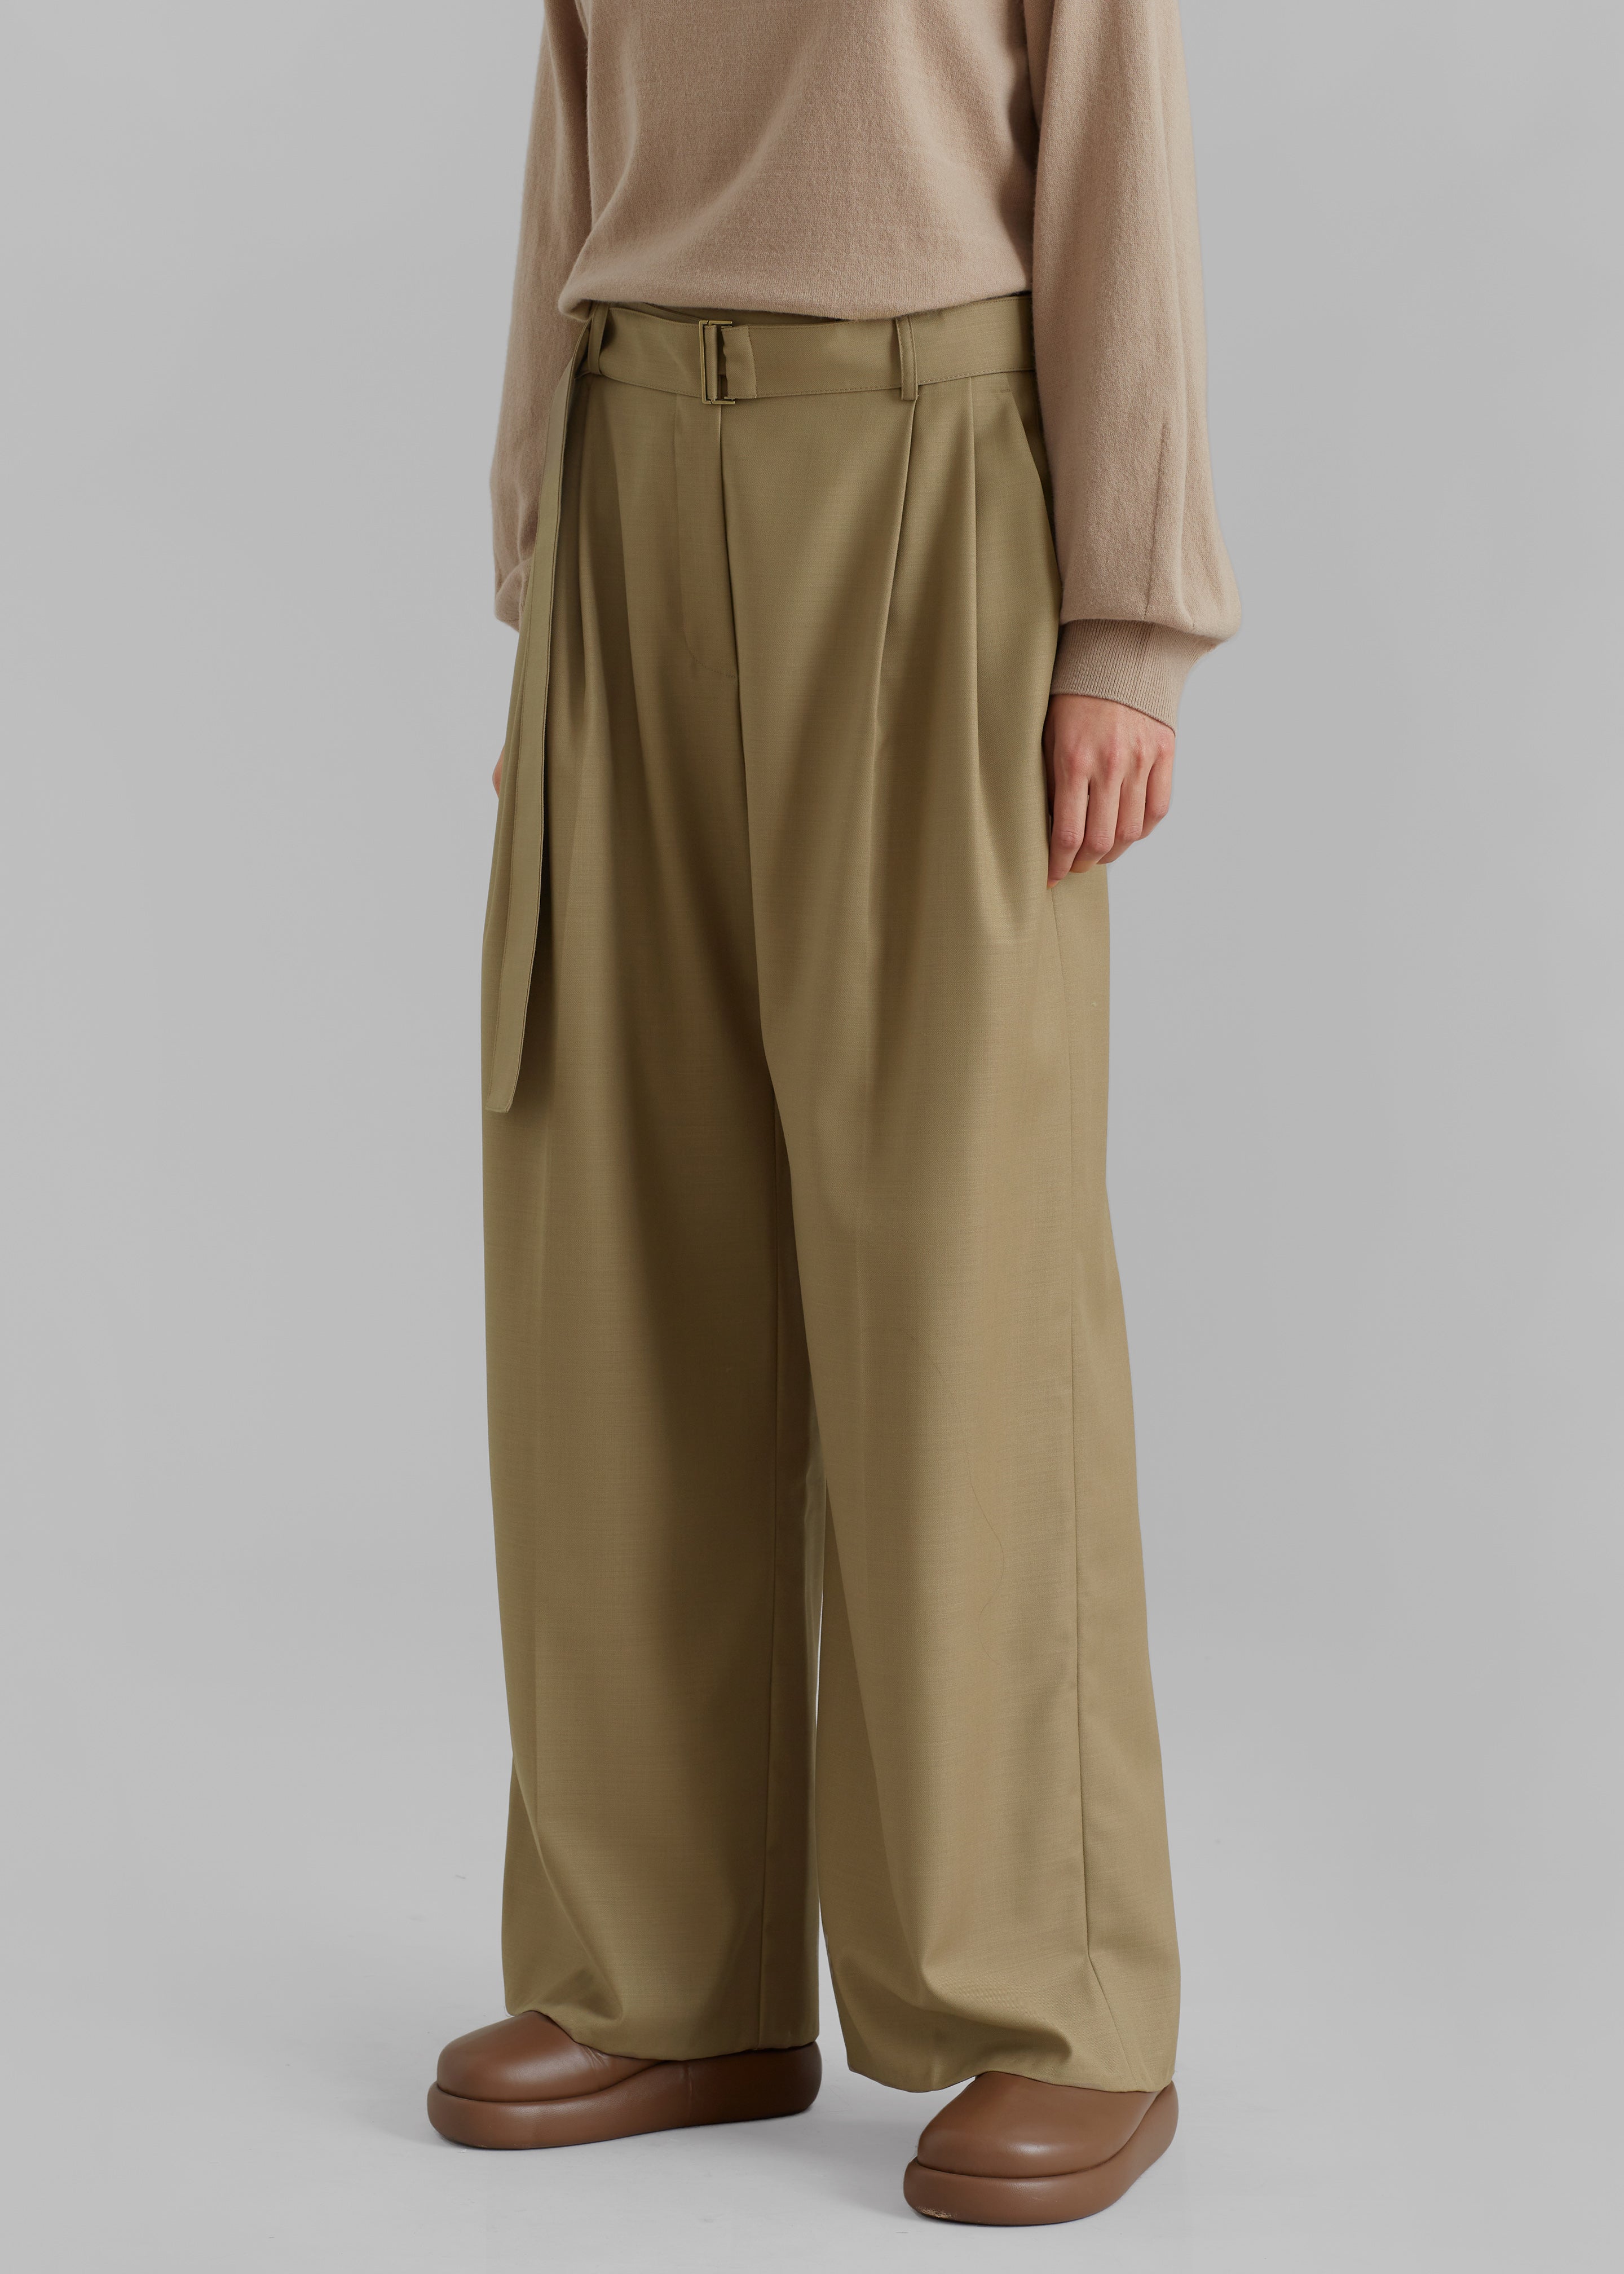 Lyxe Belted Pants - Taupe - 5